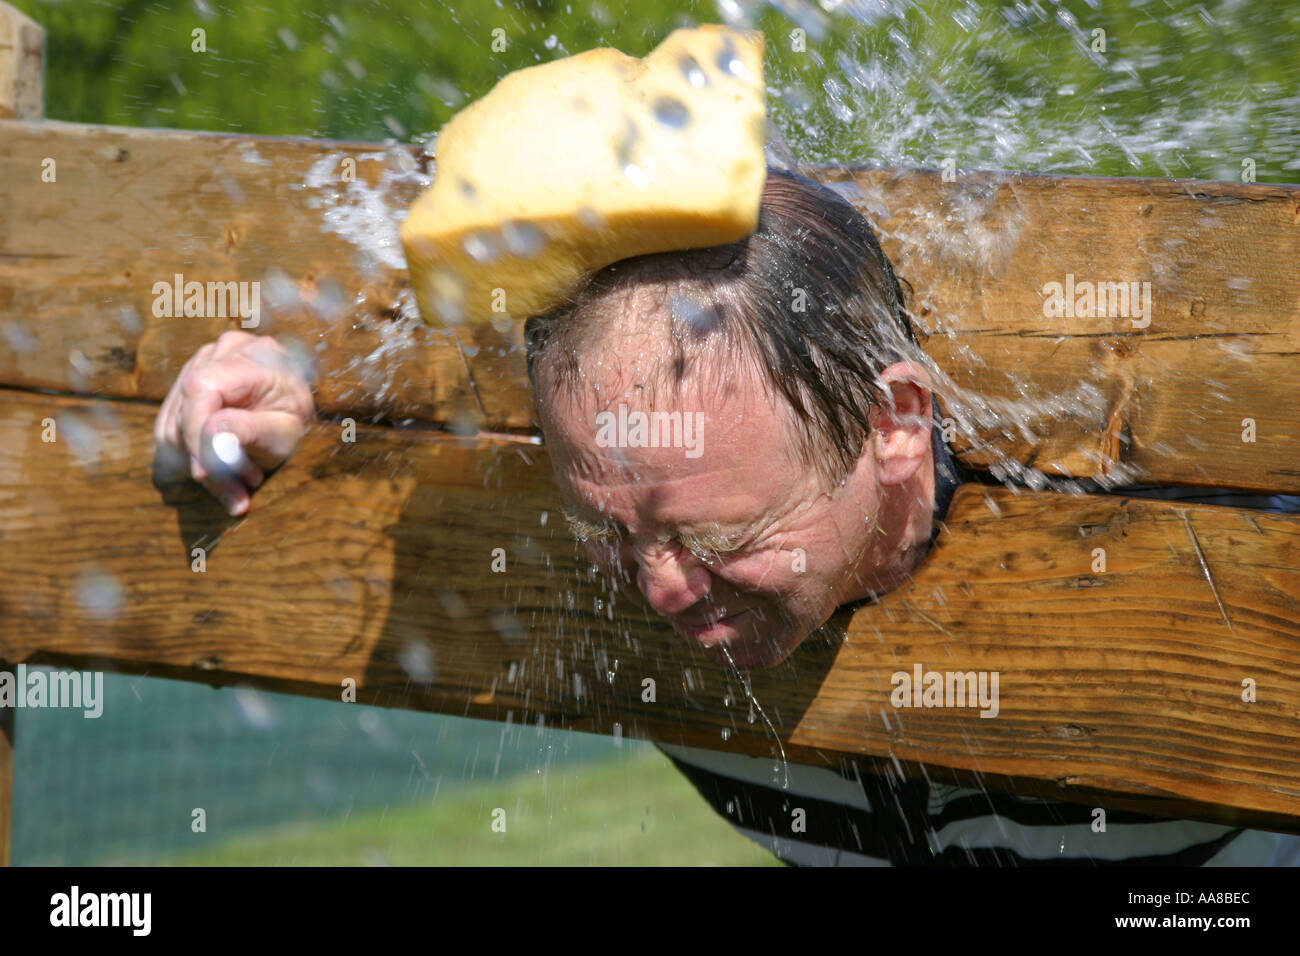 Sponge Throw High Resolution Stock Photography and Images - Alamy